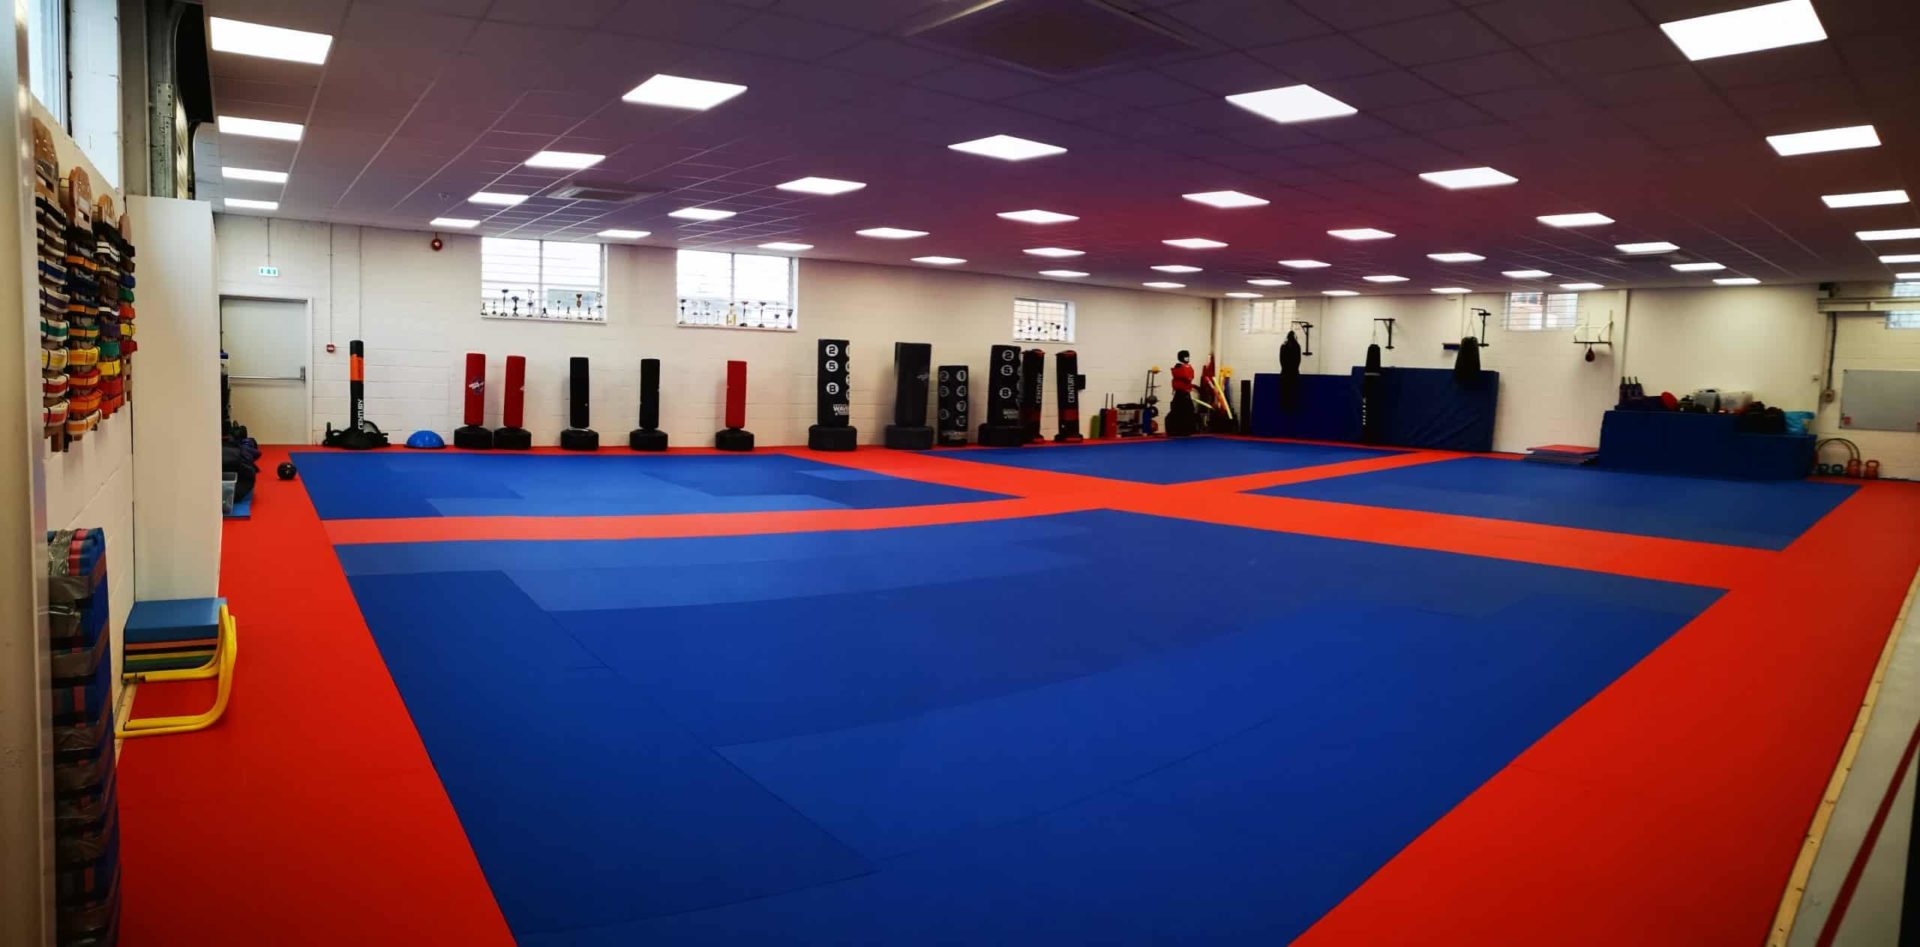 Martial Arts classes in Basingstoke for Kids and Adults - Free taster